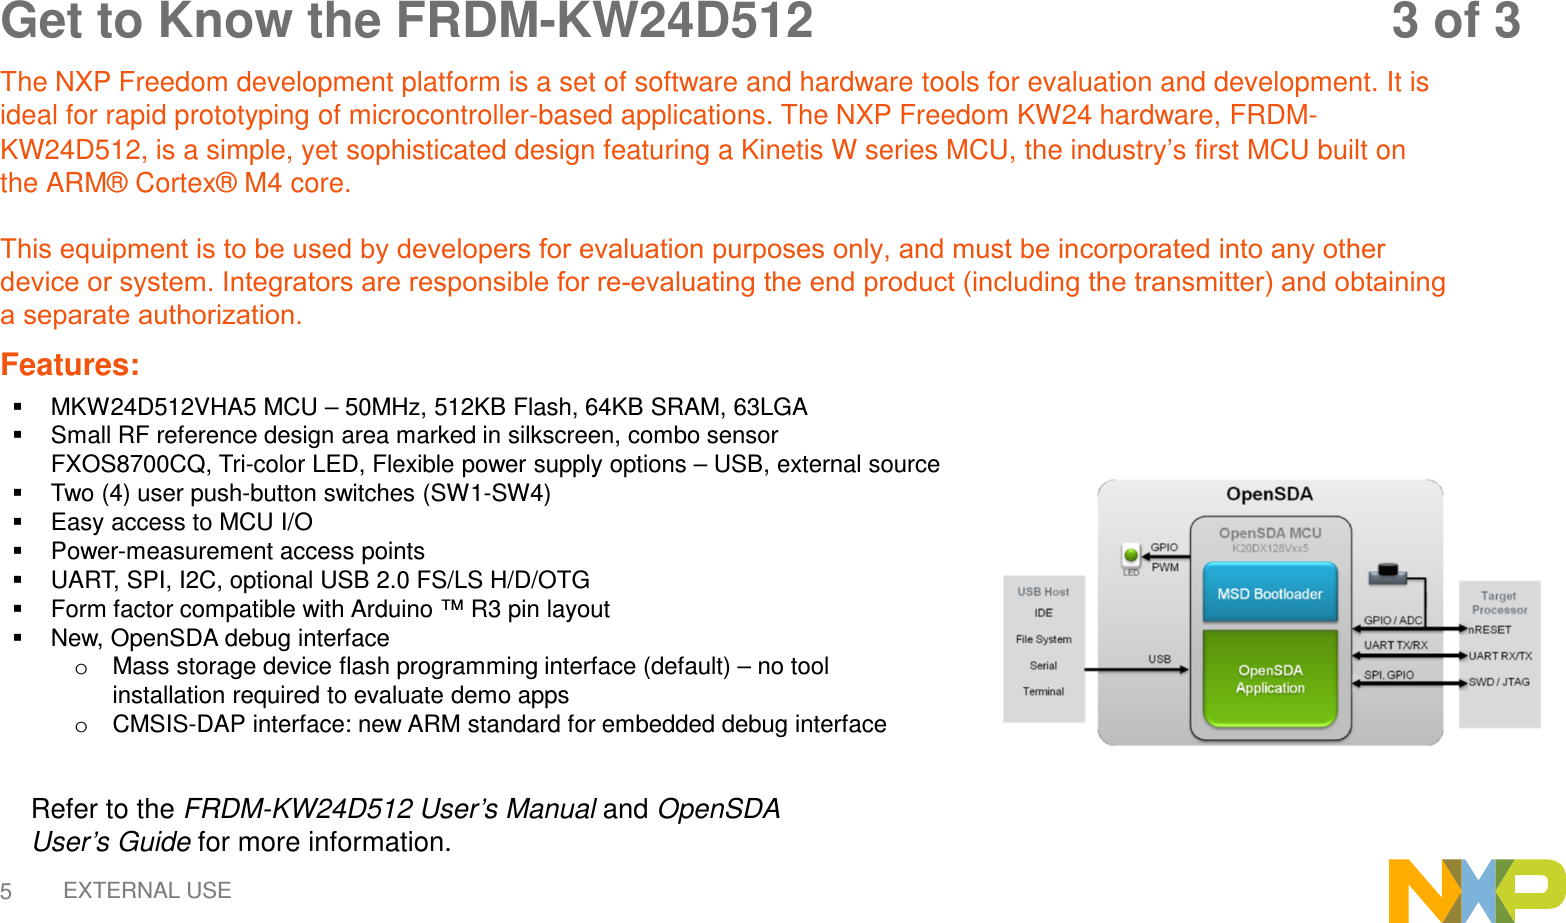 EXTERNAL USE5Get to Know the FRDM-KW24D512   3 of 3 The NXP Freedom development platform is a set of software and hardware tools for evaluation and development. It is ideal for rapid prototyping of microcontroller-based applications. The NXP Freedom KW24 hardware, FRDM-KW24D512, is a simple, yet sophisticated design featuring a Kinetis W series MCU, the industry’s first MCU built on the ARM® Cortex® M4 core. This equipment is to be used by developers for evaluation purposes only, and must be incorporated into any other device or system. Integrators are responsible for re-evaluating the end product (including the transmitter) and obtaining a separate authorization.Features: MKW24D512VHA5 MCU – 50MHz, 512KB Flash, 64KB SRAM, 63LGASmall RF reference design area marked in silkscreen, combo sensorFXOS8700CQ, Tri-color LED, Flexible power supply options – USB, external sourceTwo (4) user push-button switches (SW1-SW4)Easy access to MCU I/OPower-measurement access pointsUART, SPI, I2C, optional USB 2.0 FS/LS H/D/OTGForm factor compatible with Arduino ™ R3 pin layoutNew, OpenSDA debug interfaceoMass storage device flash programming interface (default) – no toolinstallation required to evaluate demo appsoCMSIS-DAP interface: new ARM standard for embedded debug interfaceRefer to the FRDM-KW24D512 User’s Manual and OpenSDAUser’s Guide for more information. 